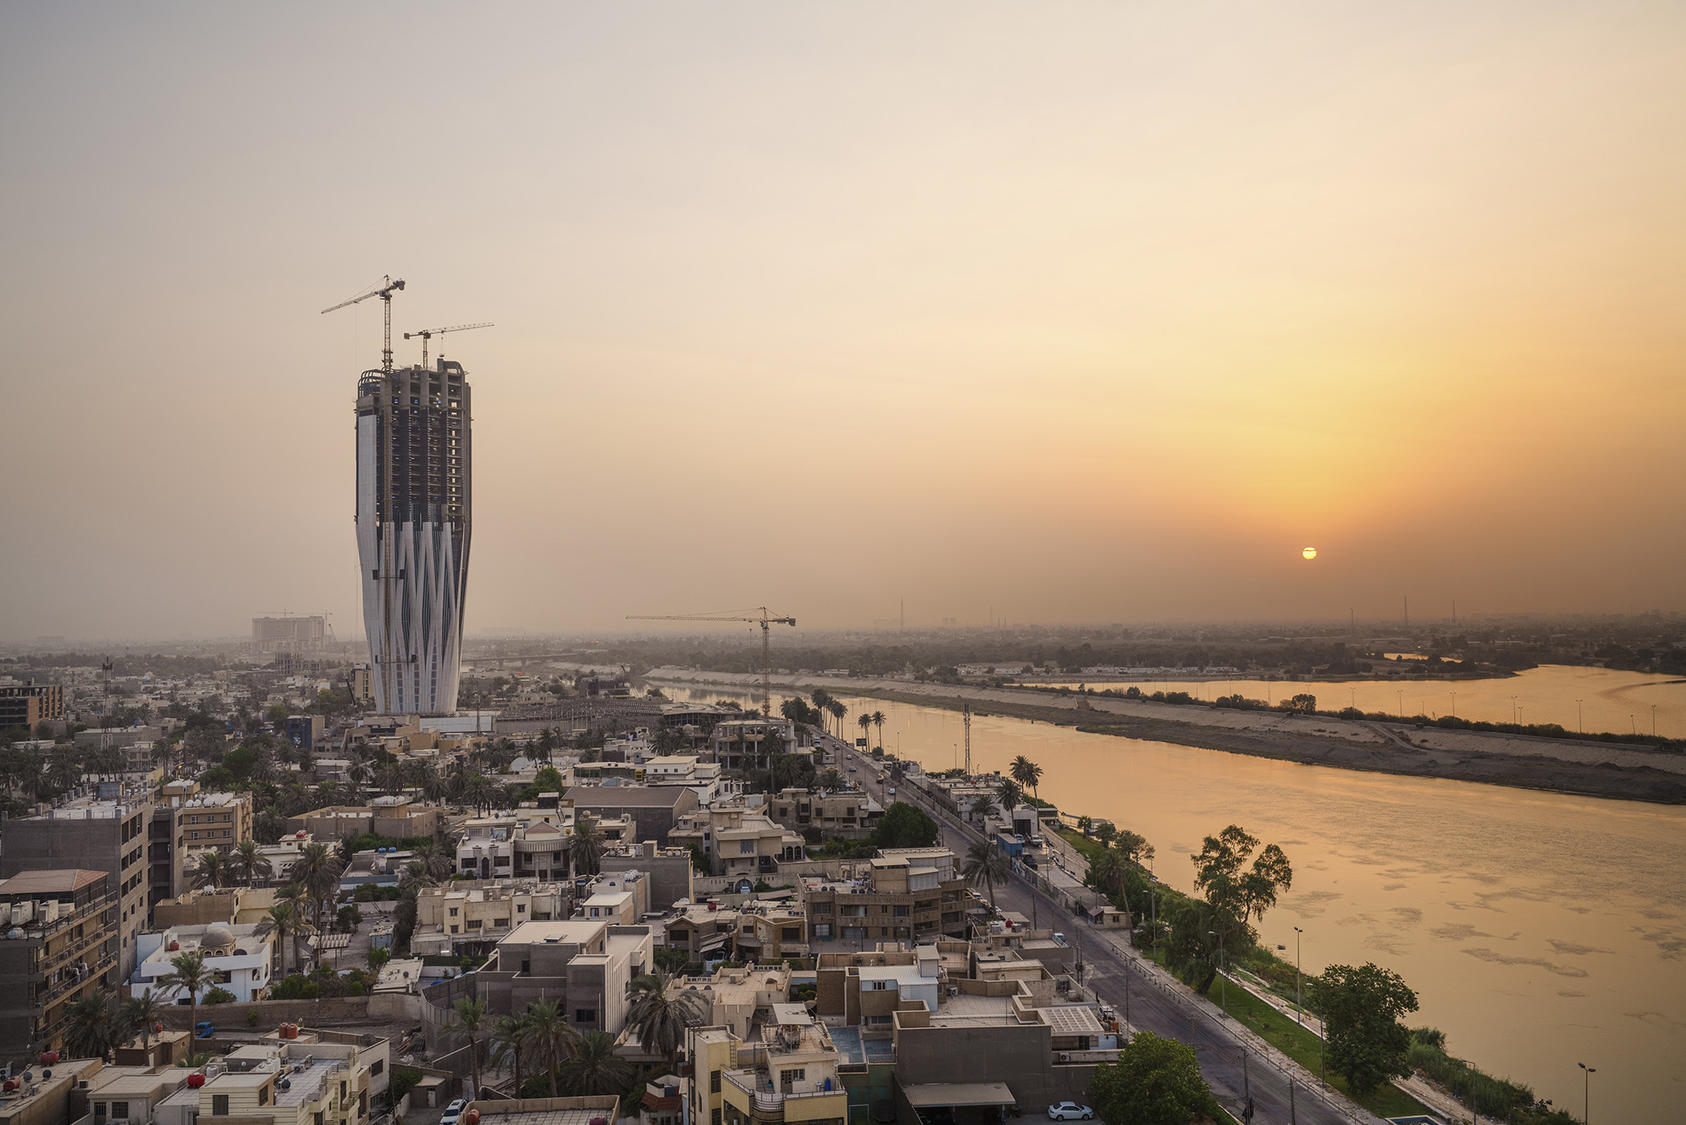 The Central Bank of Iraq tower under construction on the banks of the Tigris River in Baghdad. September 6, 2022. (Emily Garthwaite/The New York Times)